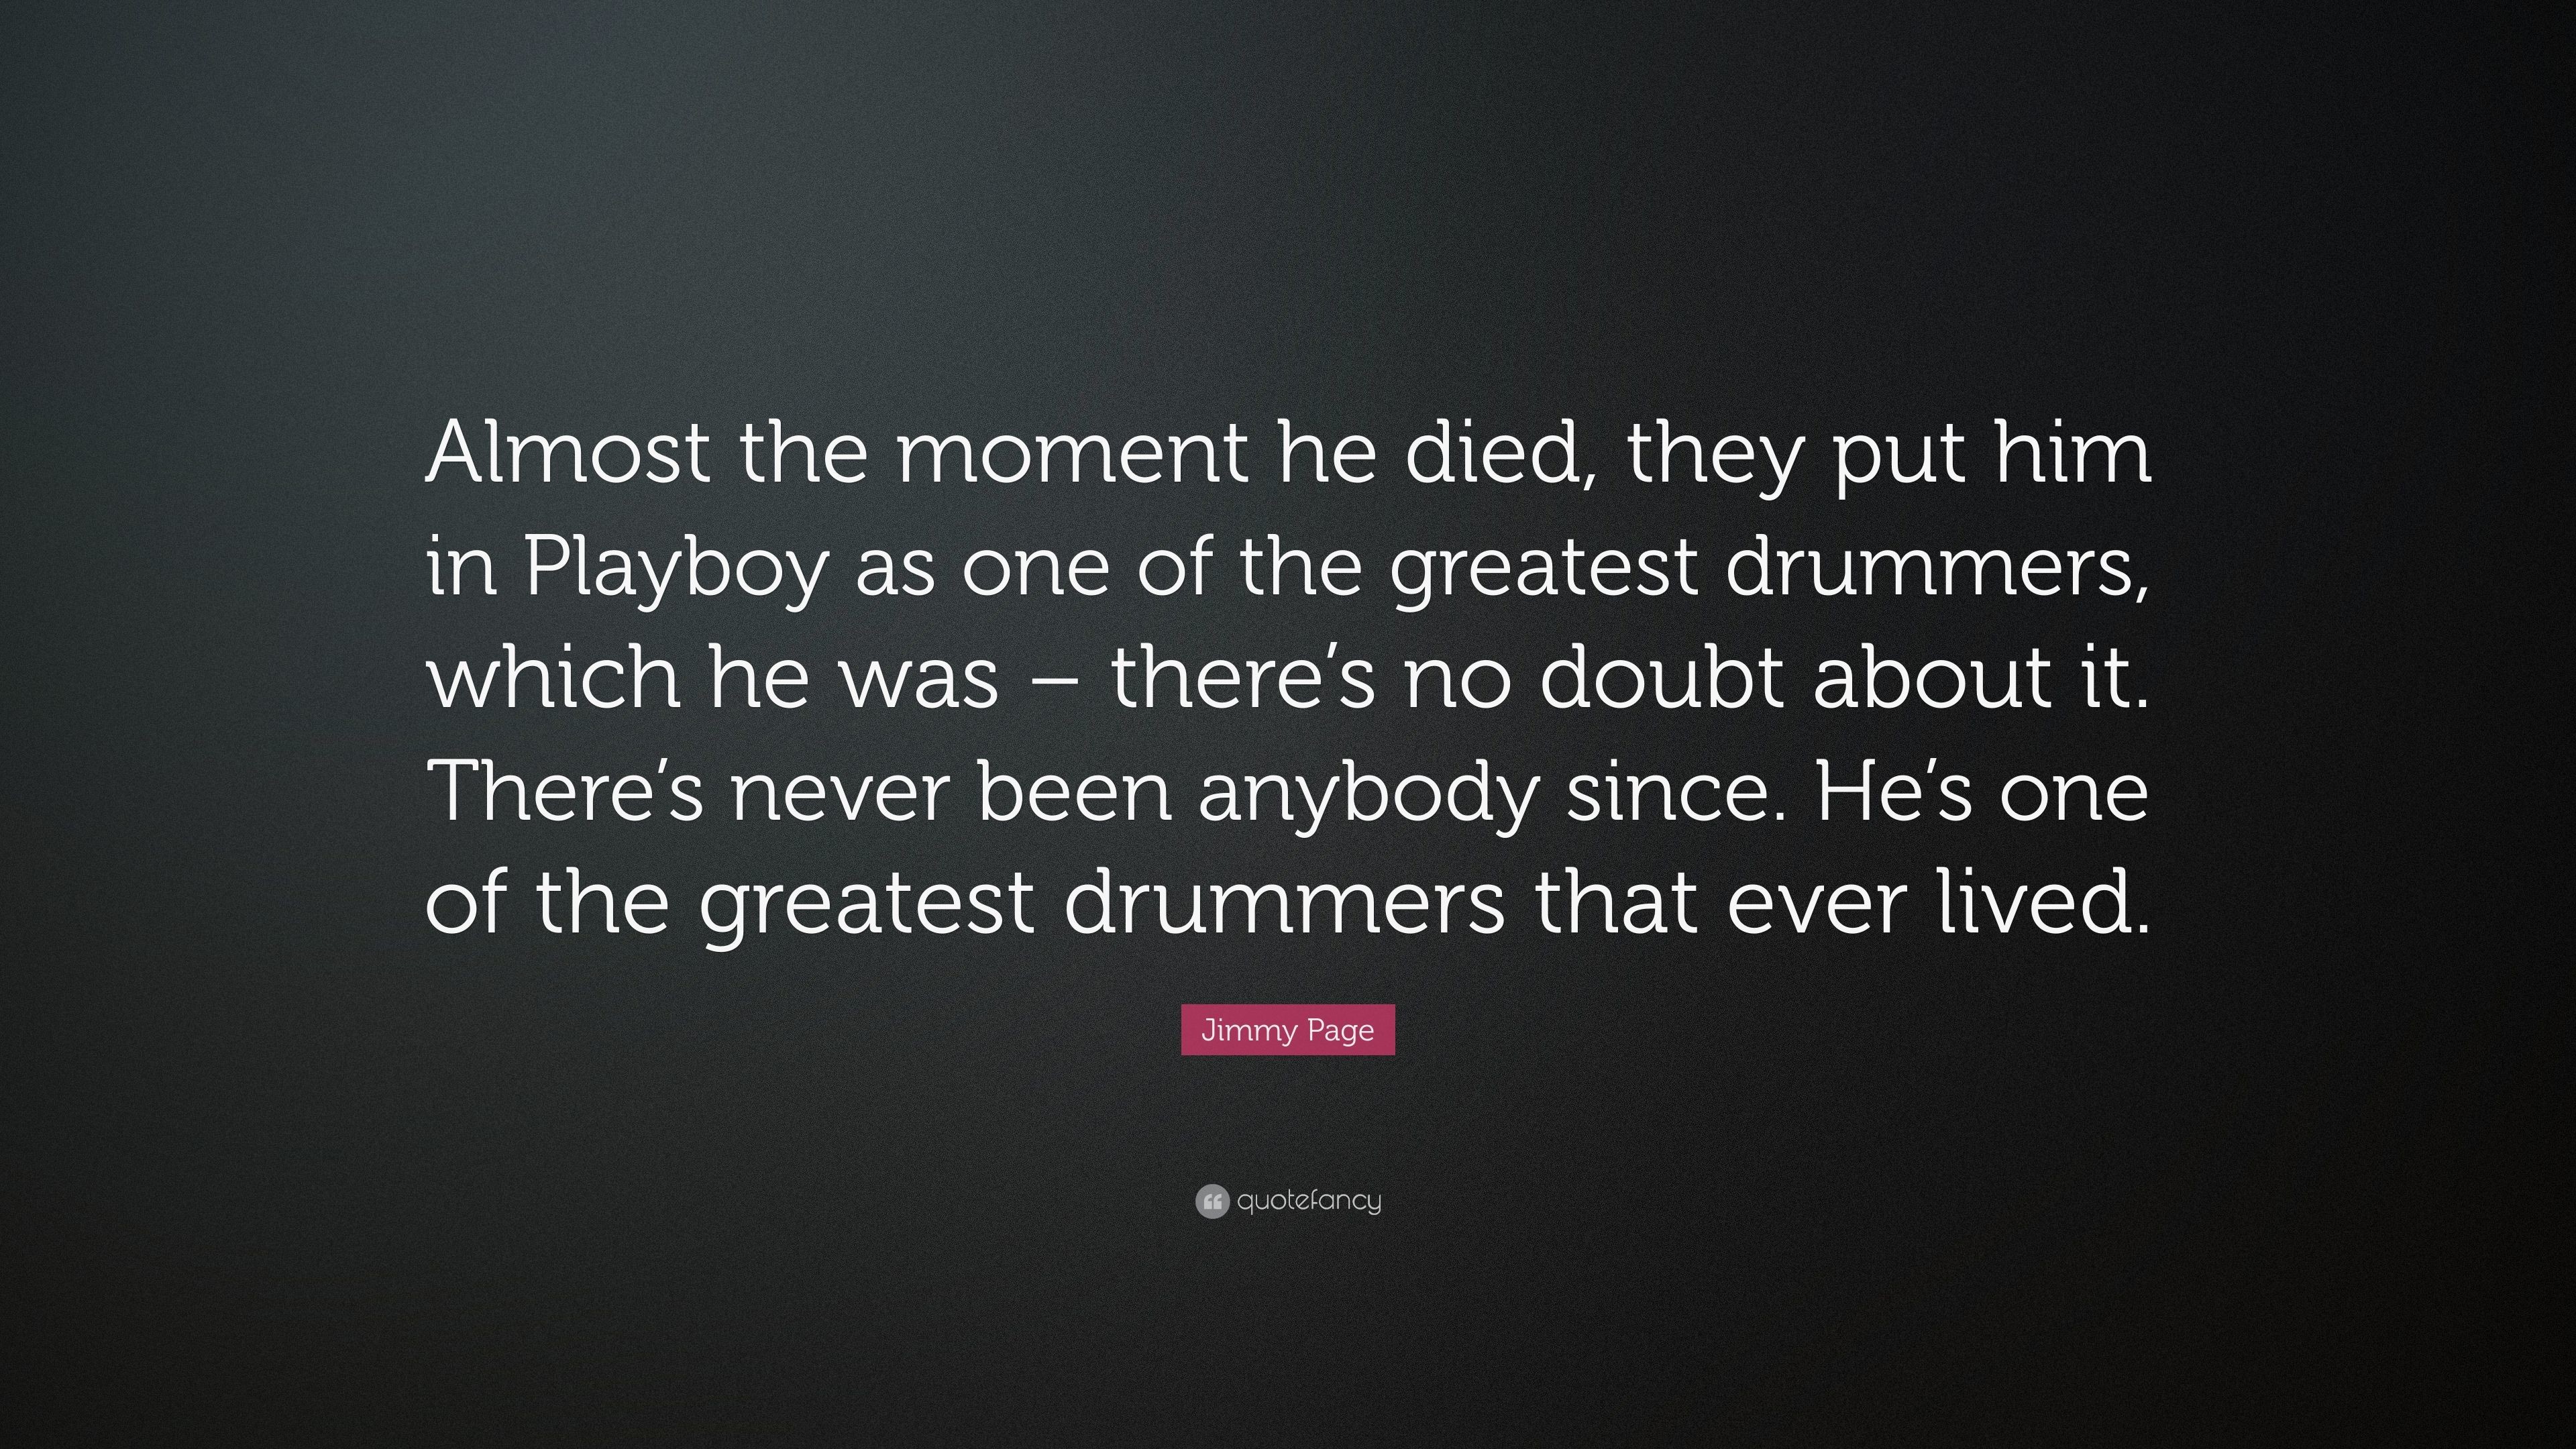 3840x2160 Jimmy Page Quote: “Almost the moment he died, they put him in Playboy